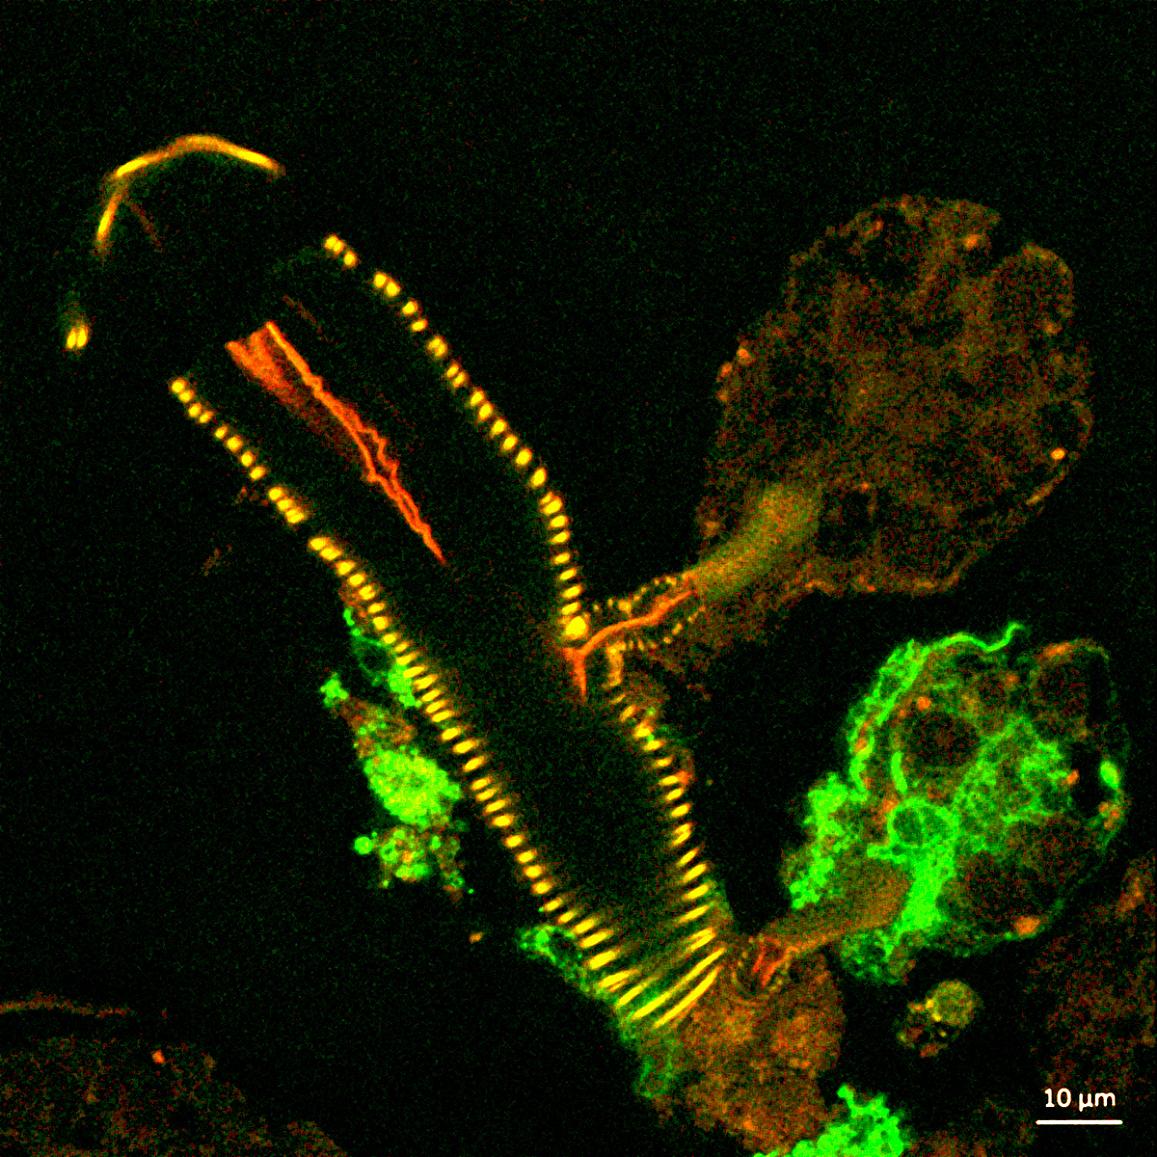 confocal microscope image showing a cross section of a tick salivary gland infected with Langat virus